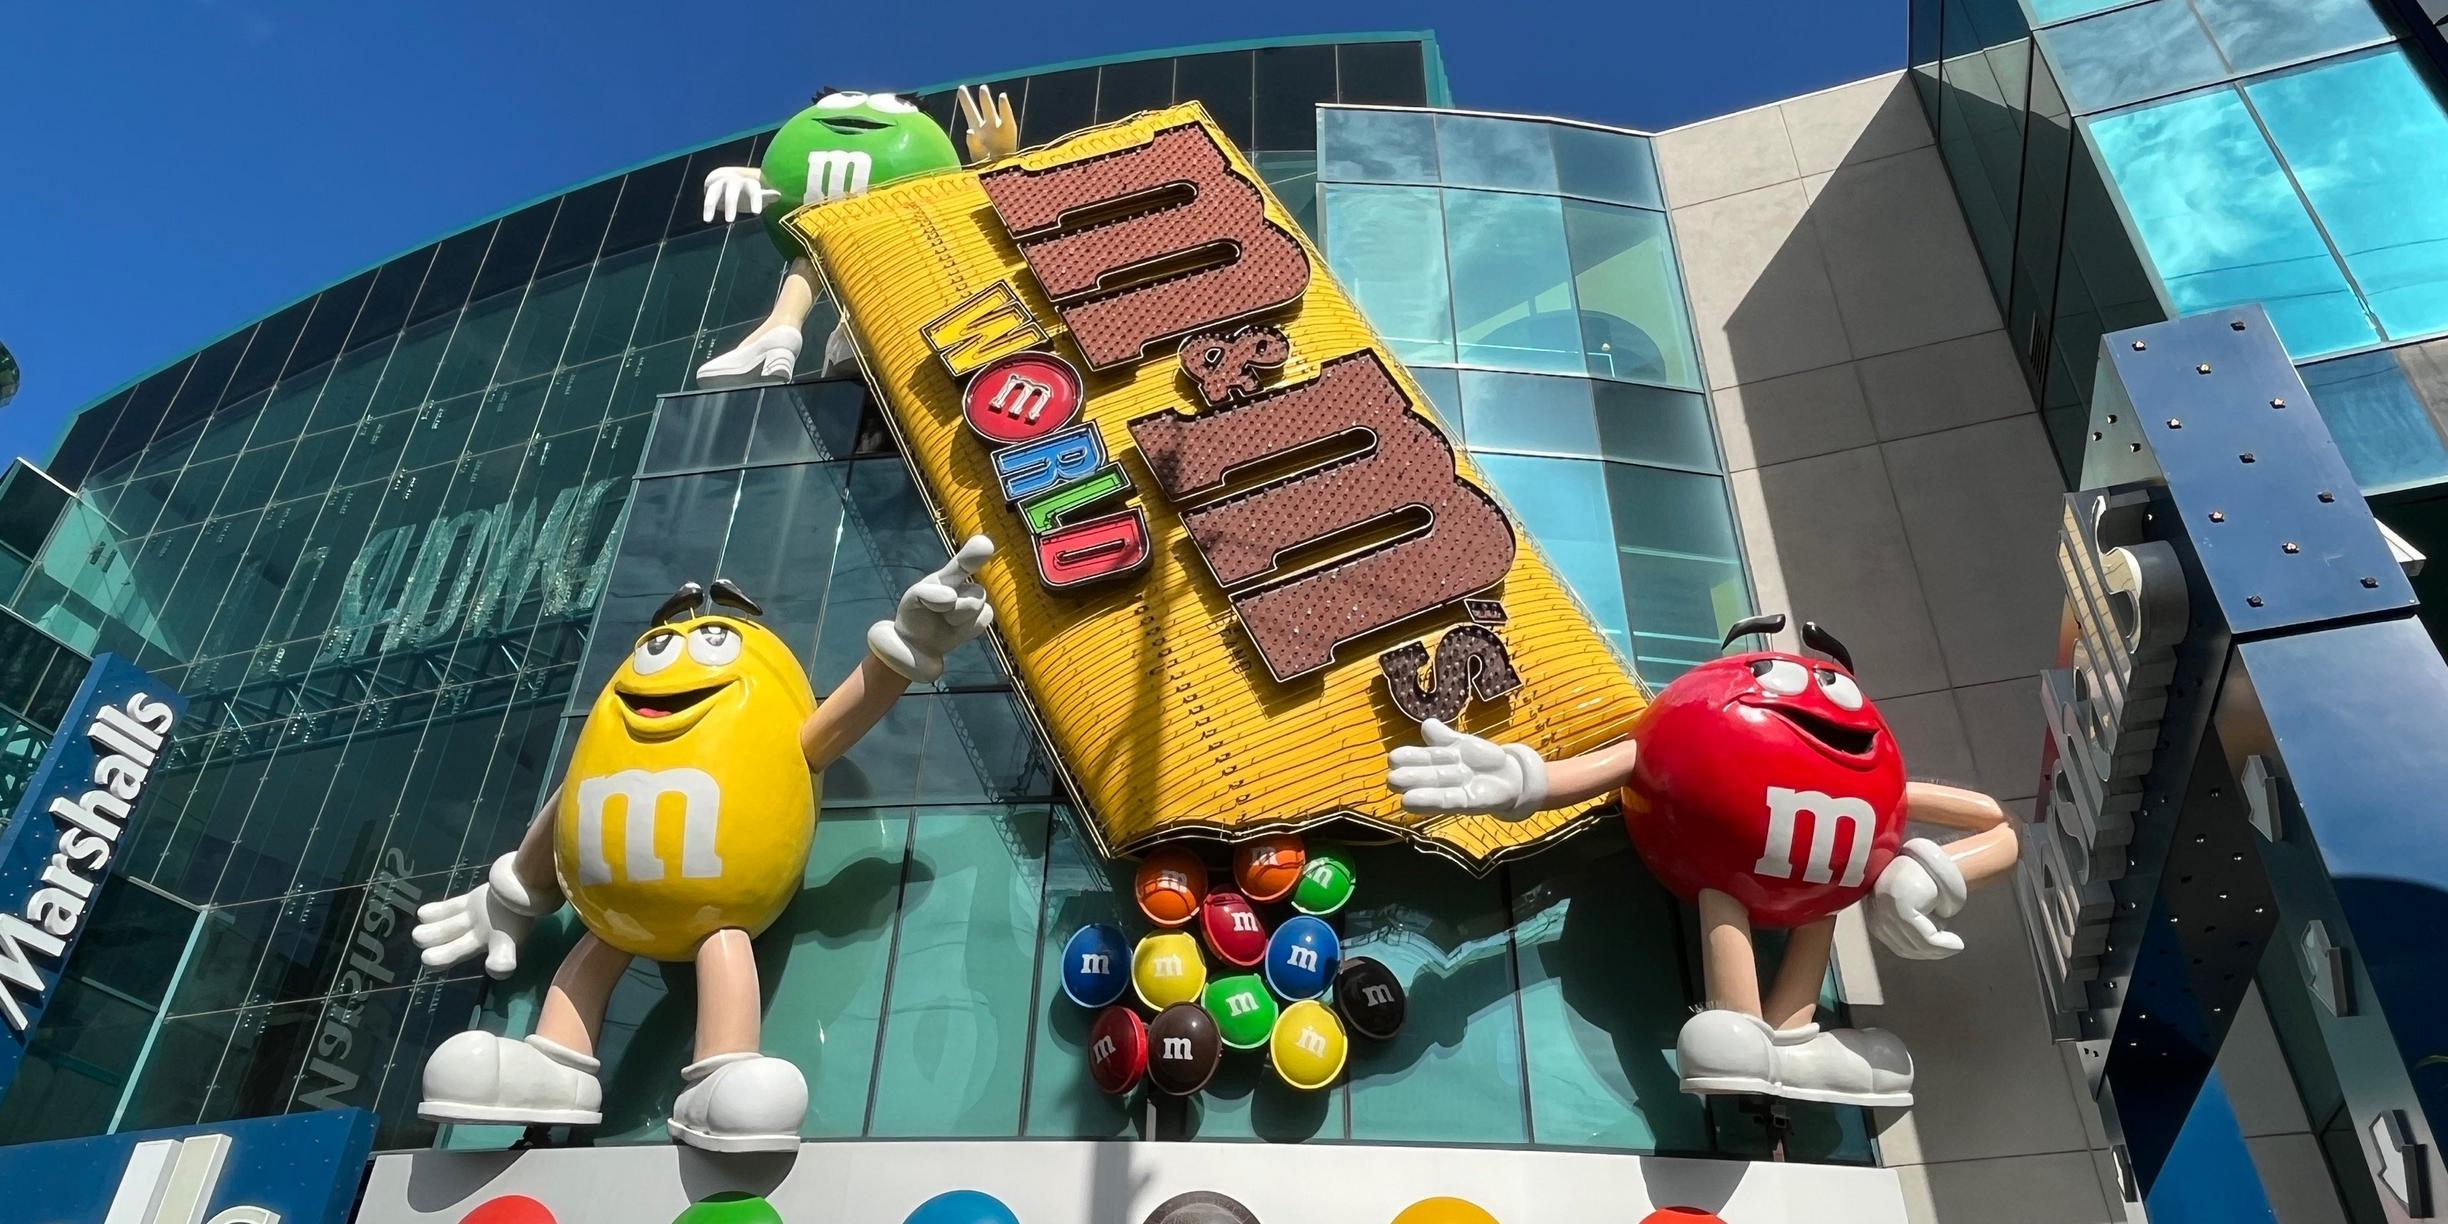 M&M Madness – Park Avenue Confectionary & General Store